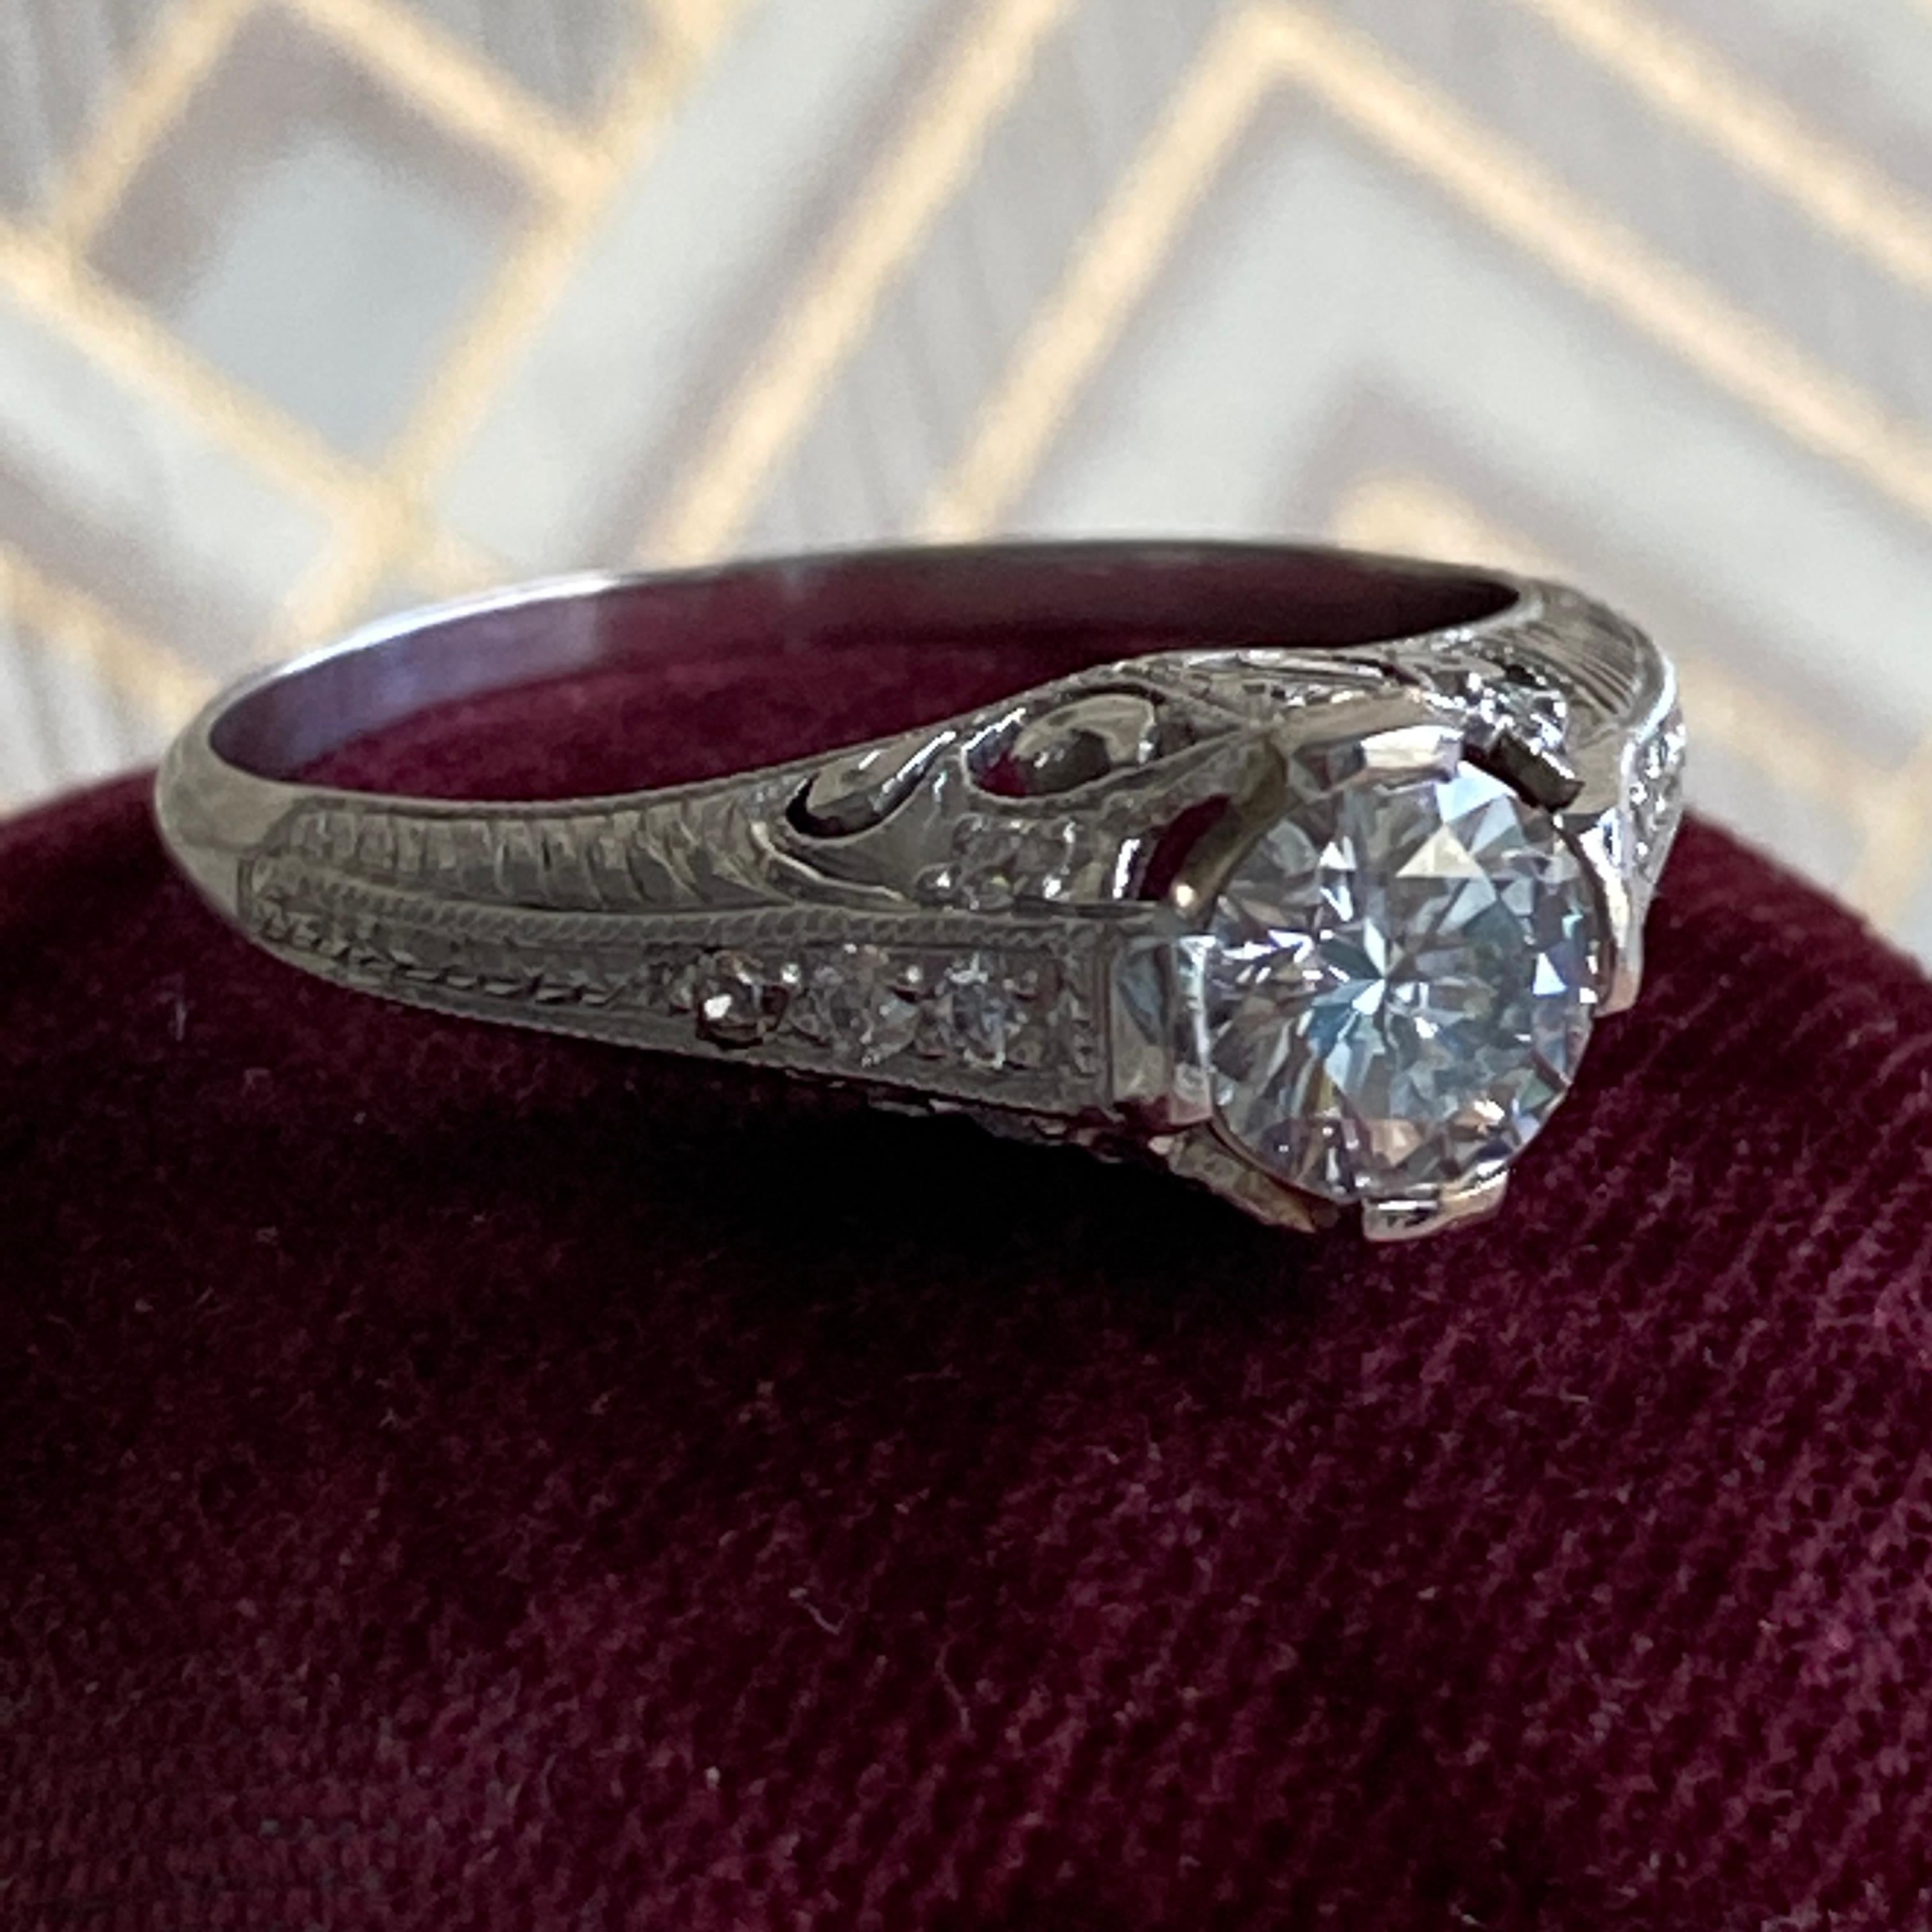 Edwardian Filigree Diamond Platinum Engagement Ring In Excellent Condition For Sale In Scotts Valley, CA